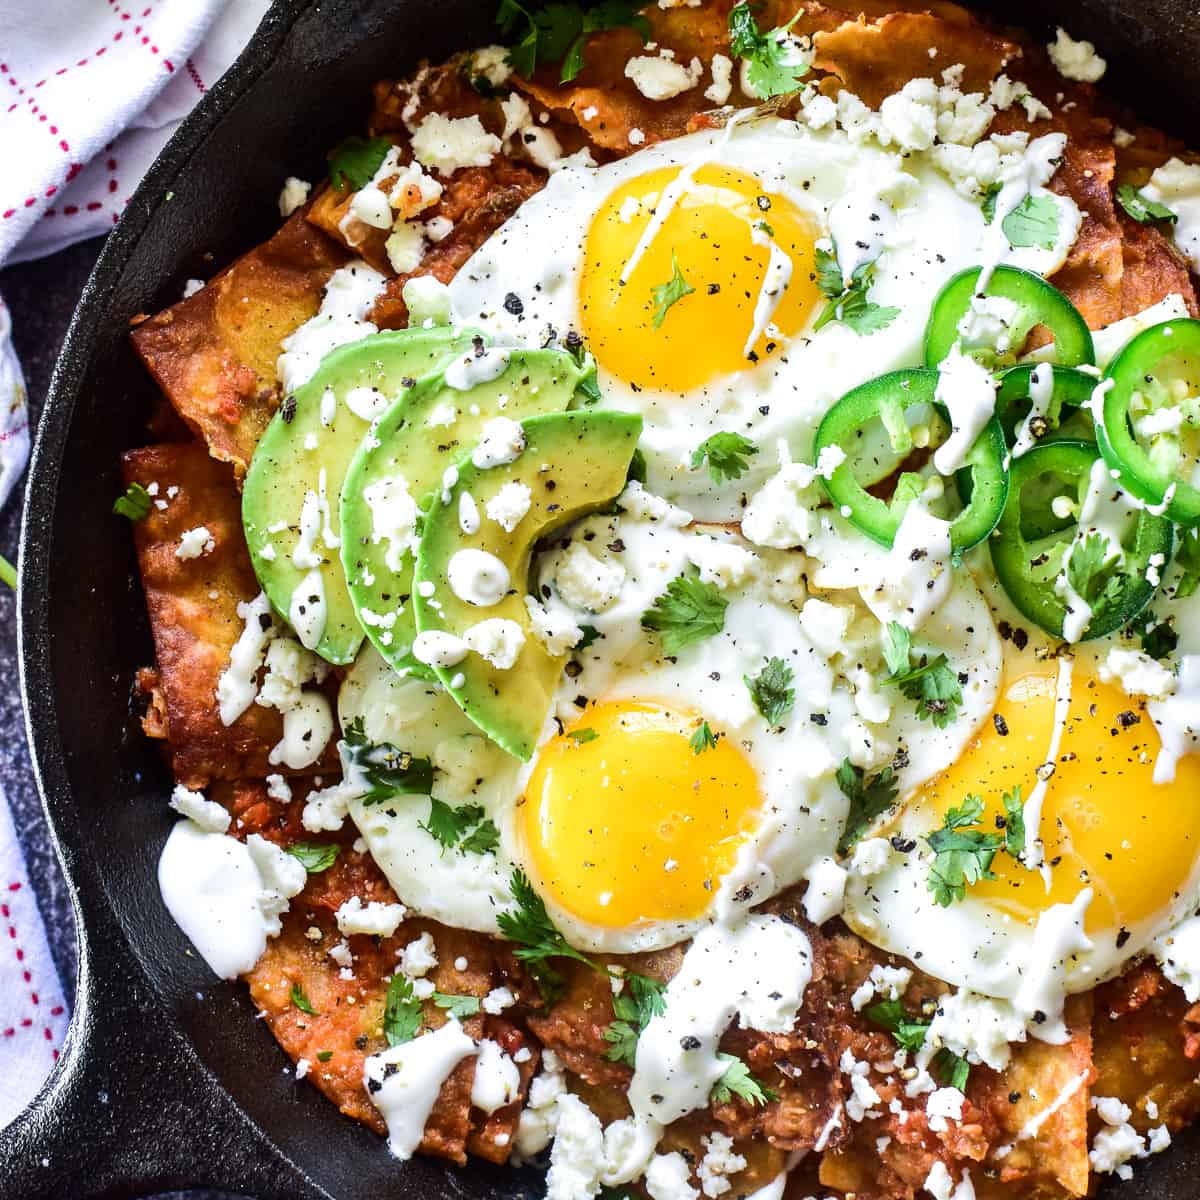 https://www.lemontreedwelling.com/wp-content/uploads/2021/01/chilaquiles-featured.jpg